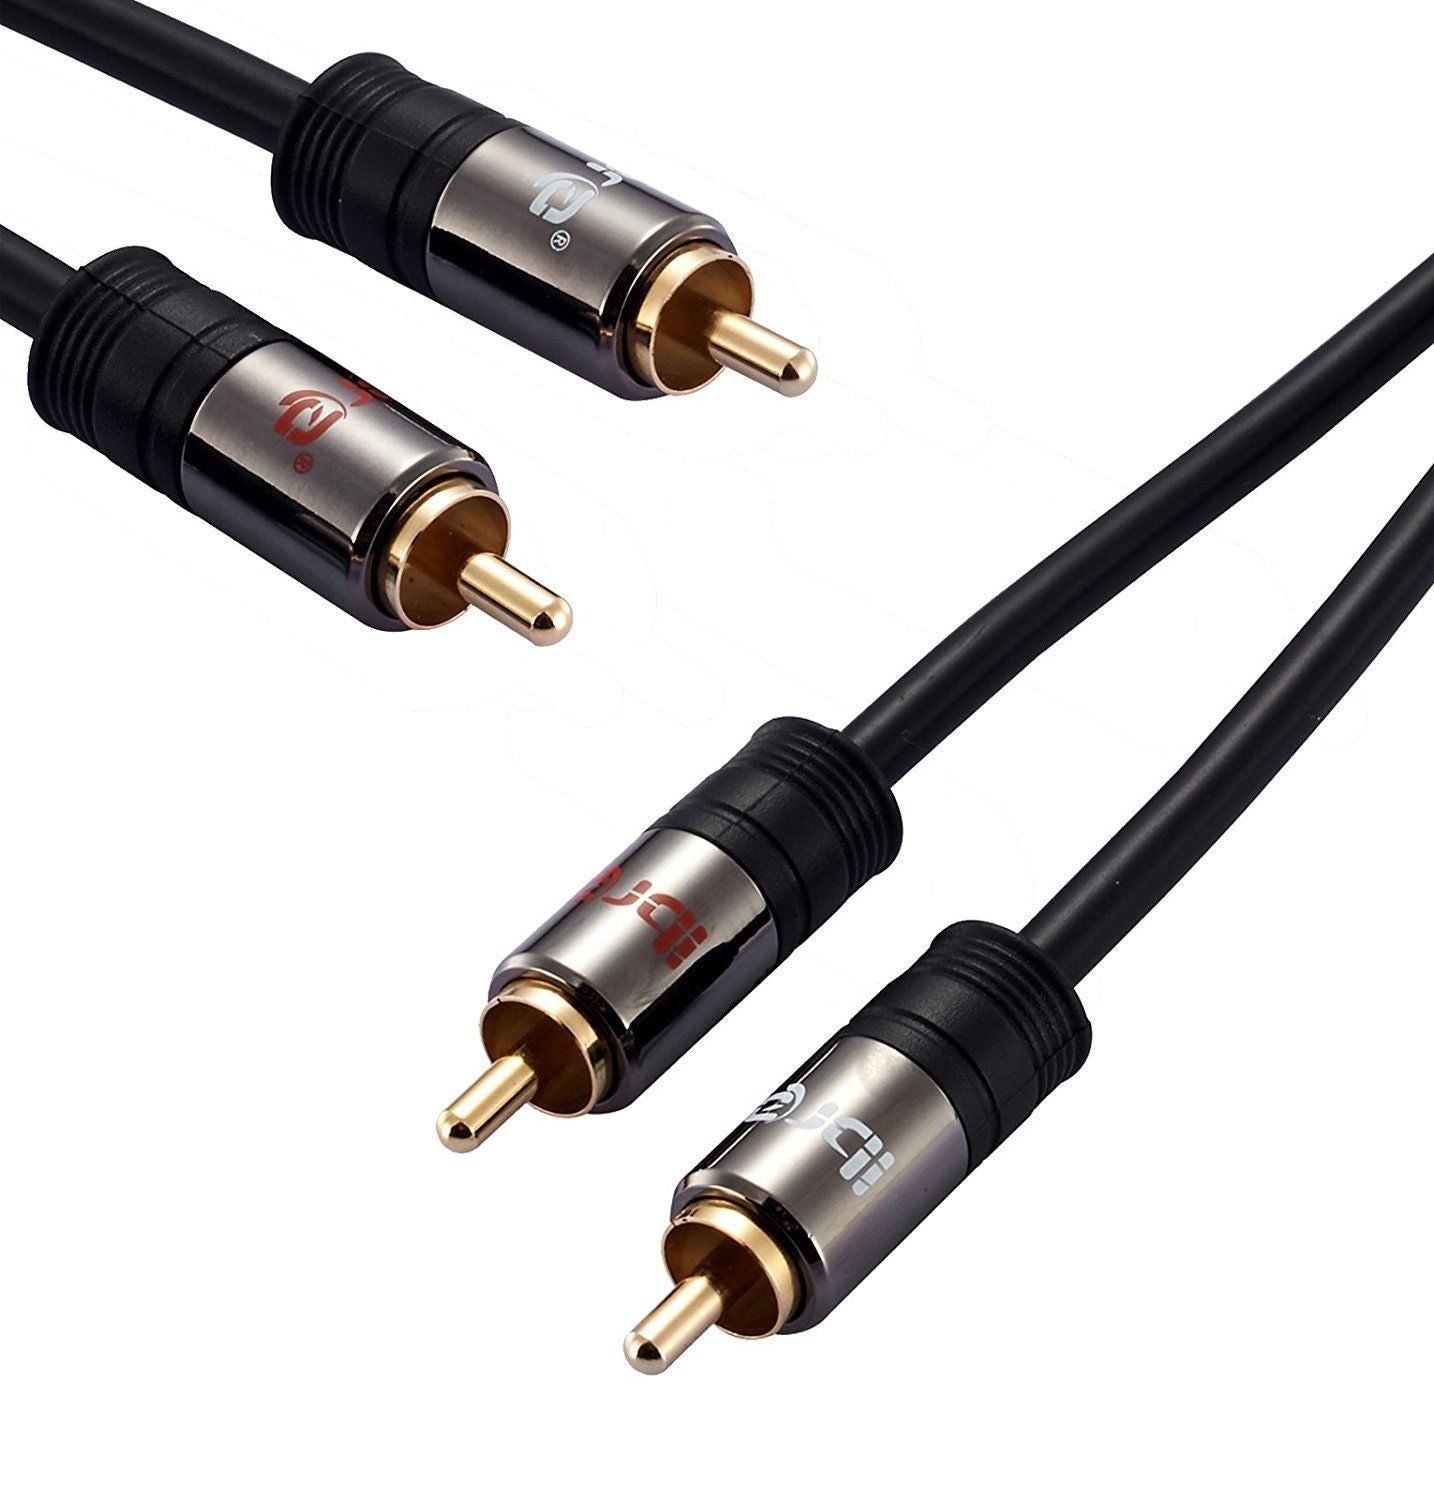 IBRA 0.5M 2RCA Male to 2RCA Male High Quality Home Theater Audio Cable -2RCA TO 2RCA Cable - Gun Metal Range